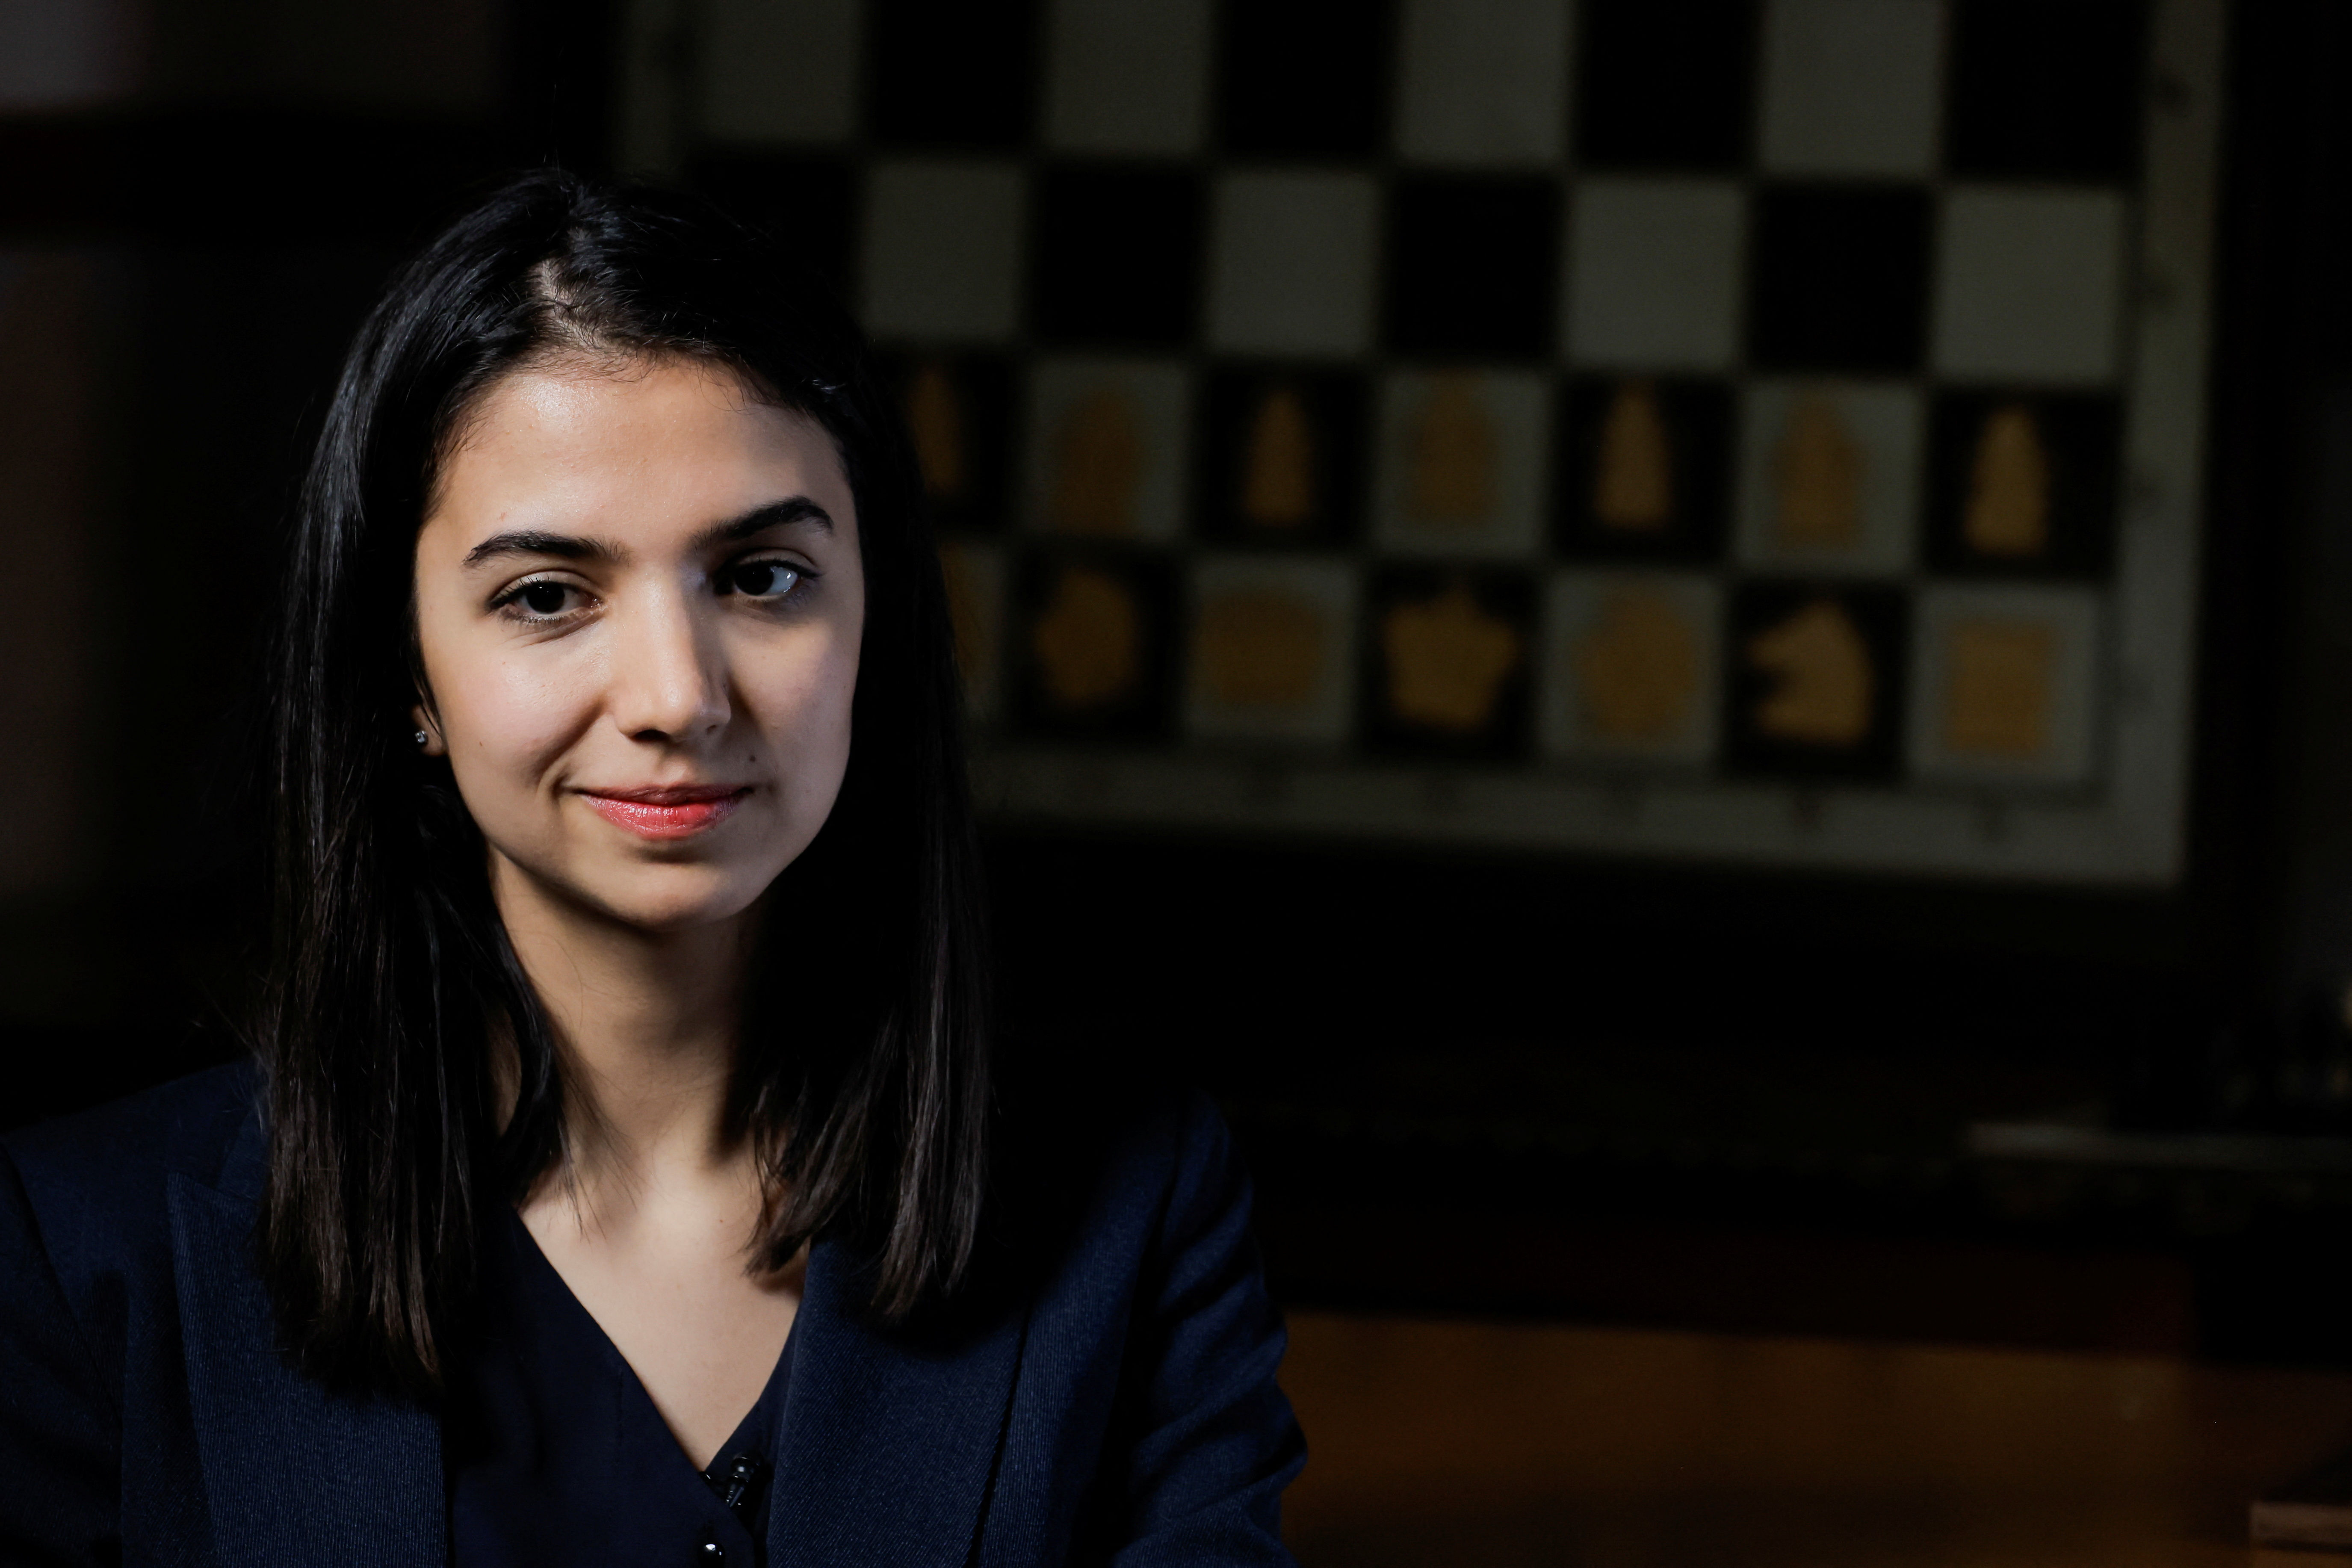 Iranian chess player Sara Khadem gestures during an interview with Reuters